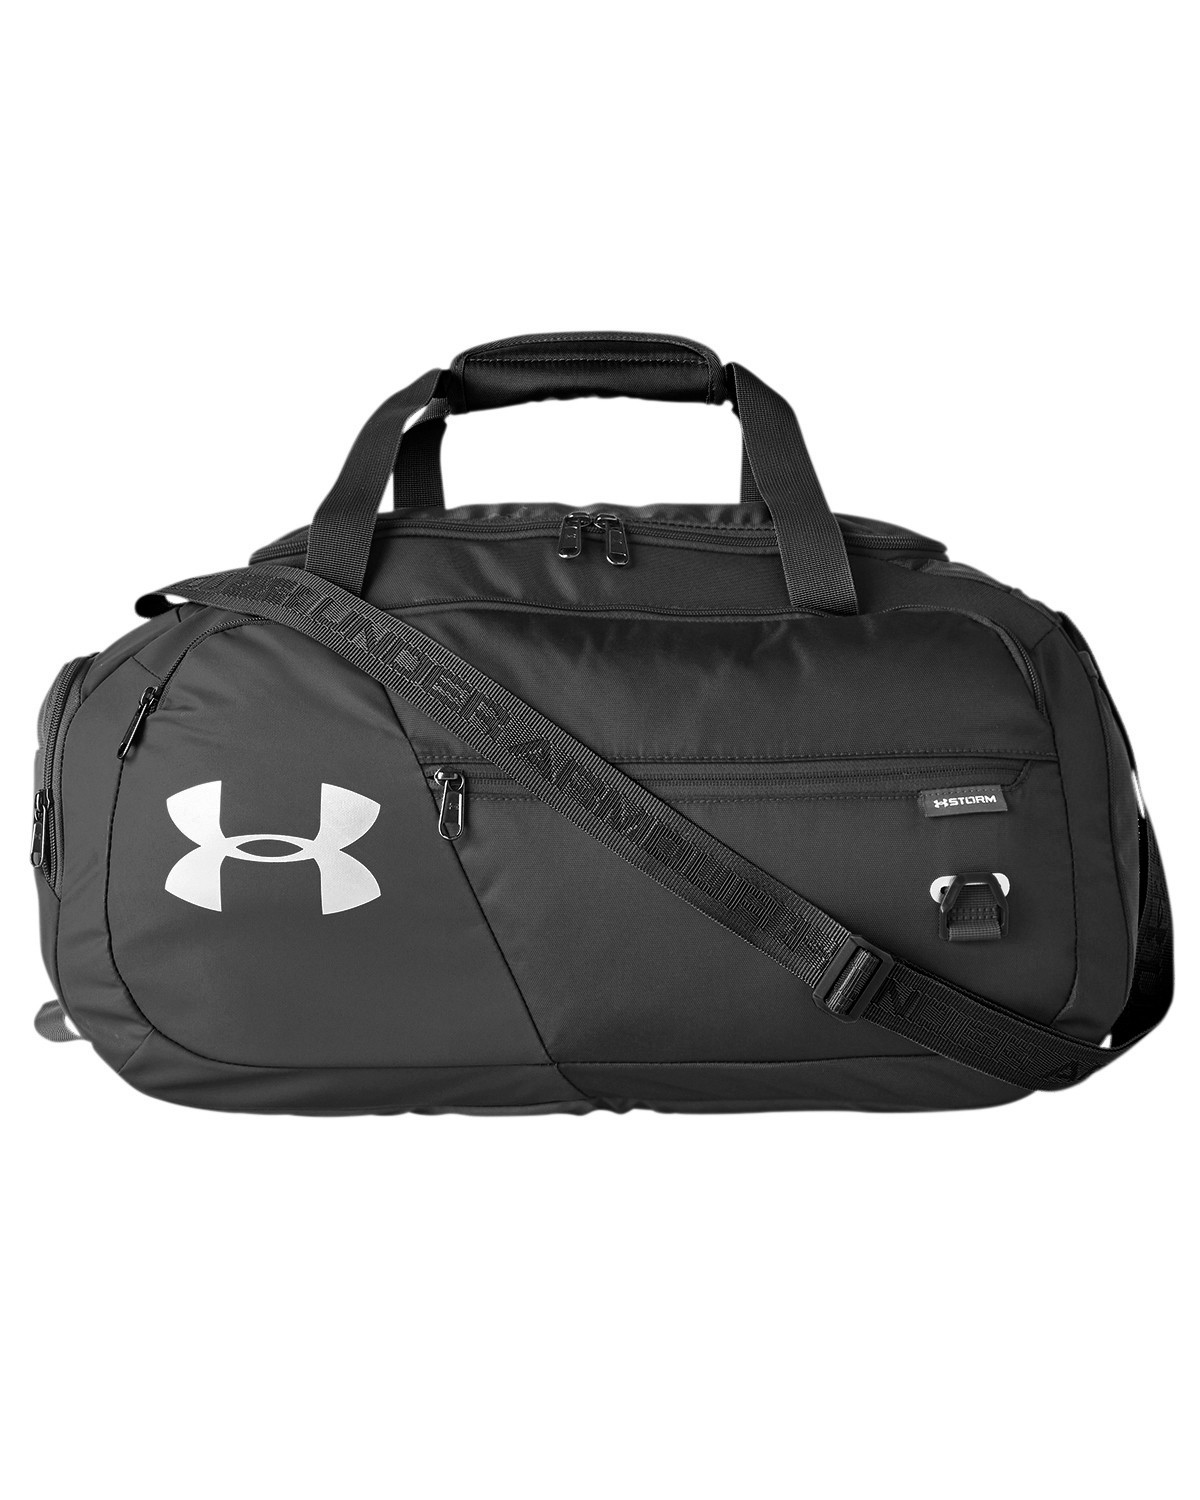 under armour sports bag